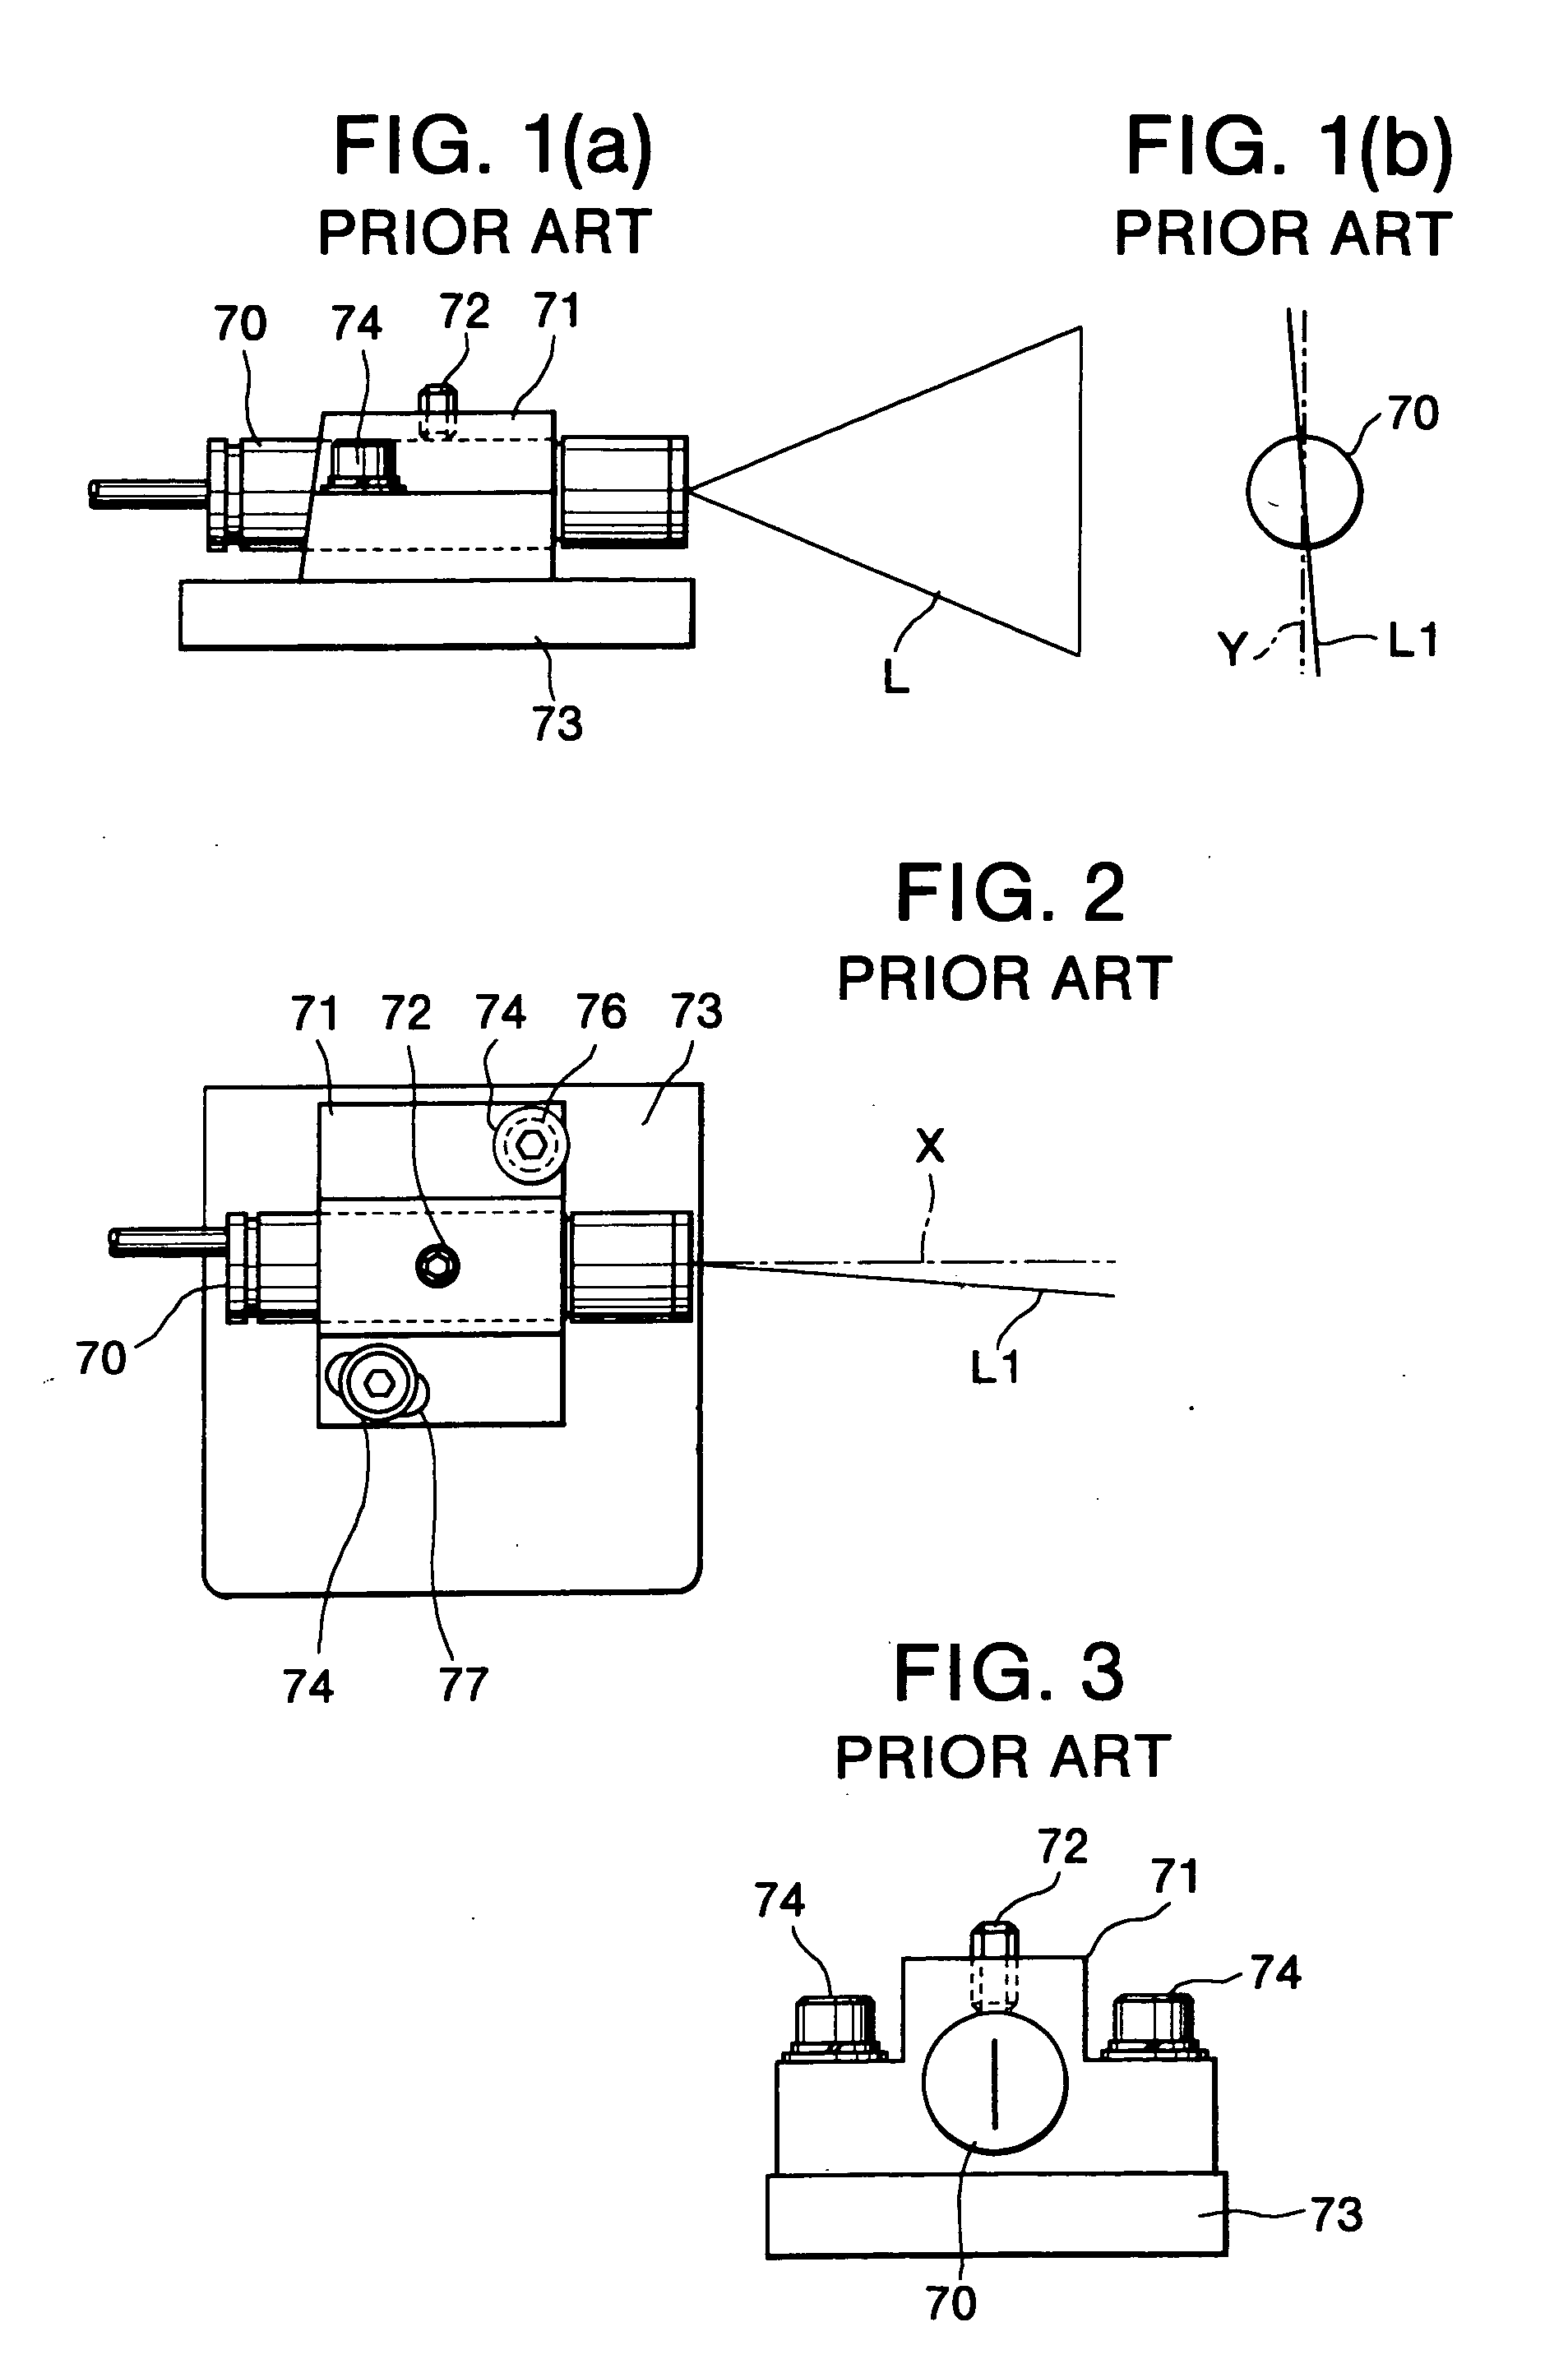 Cutter with laser generator that irradiates cutting position on workpiece to facilitate alignment of blade with cutting position